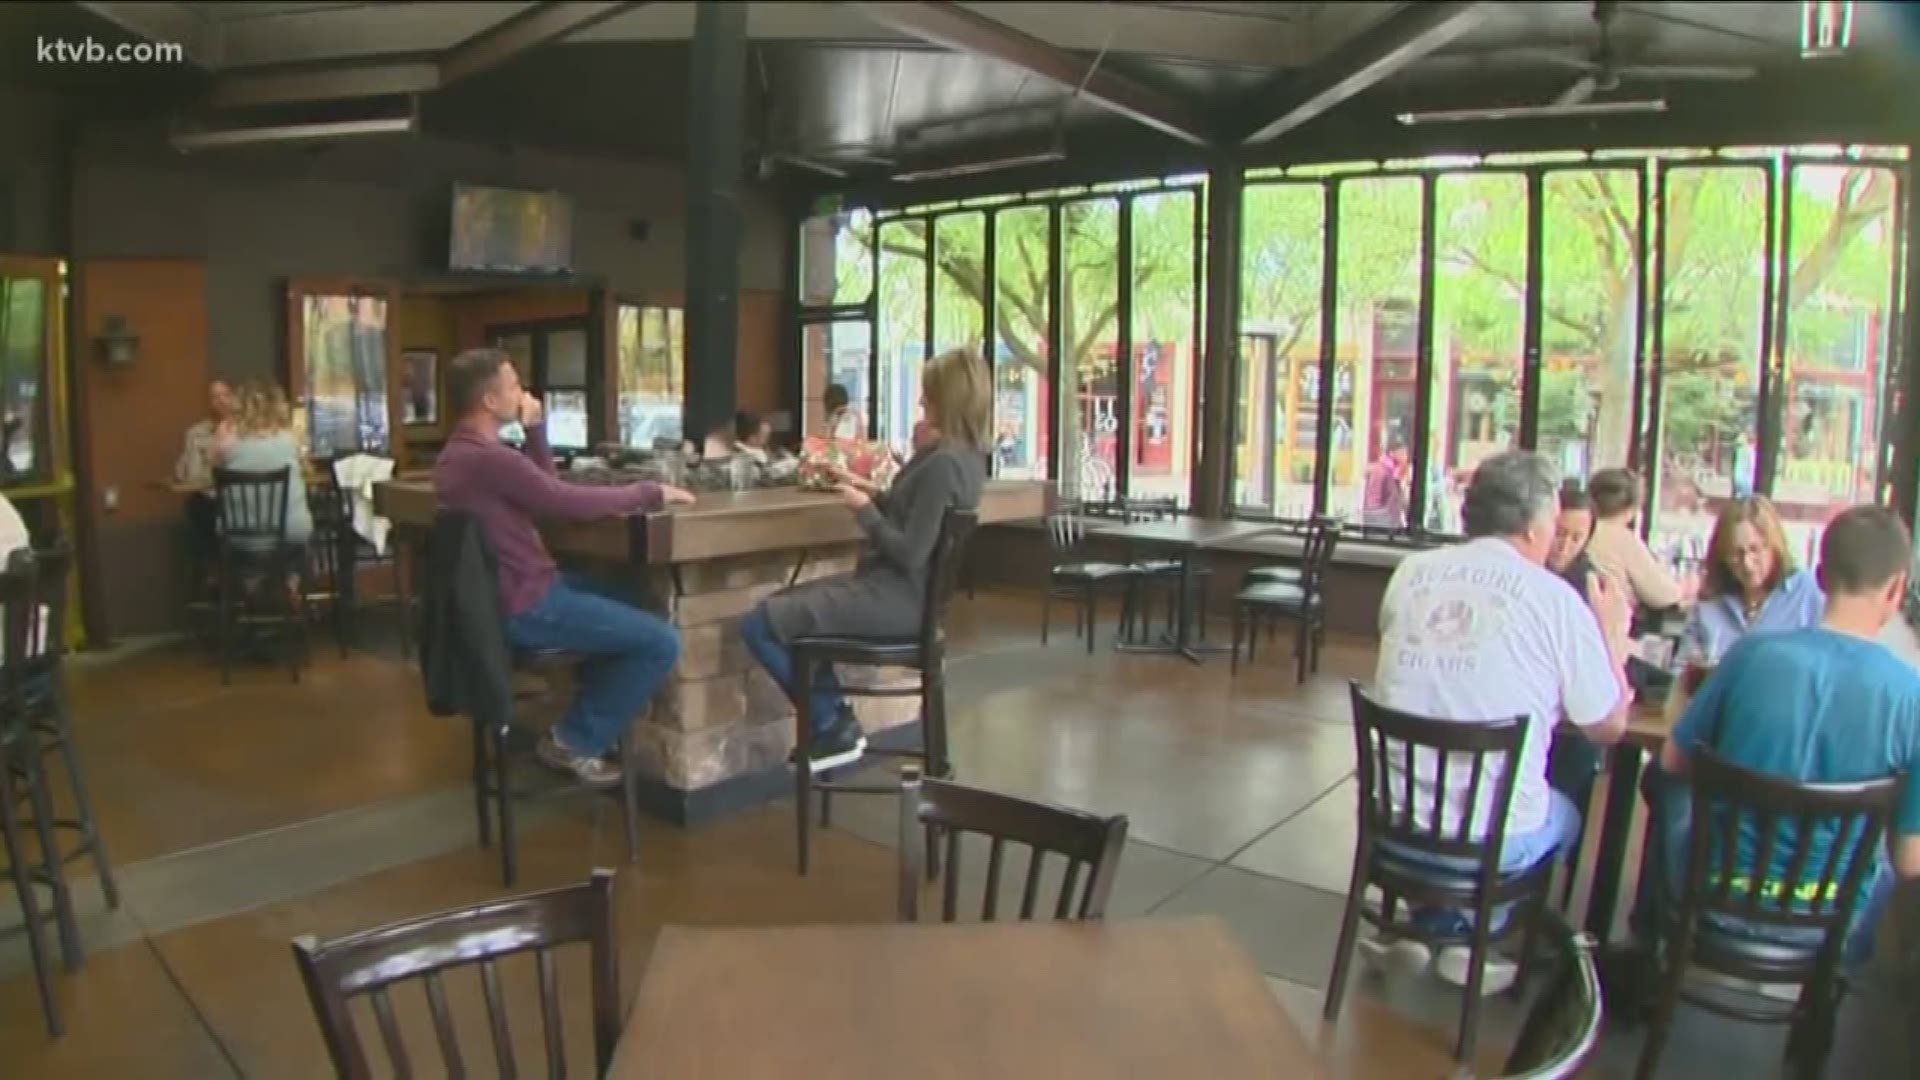 KTVB checked in with health officials and local restaurants to see how the guidelines are being followed.